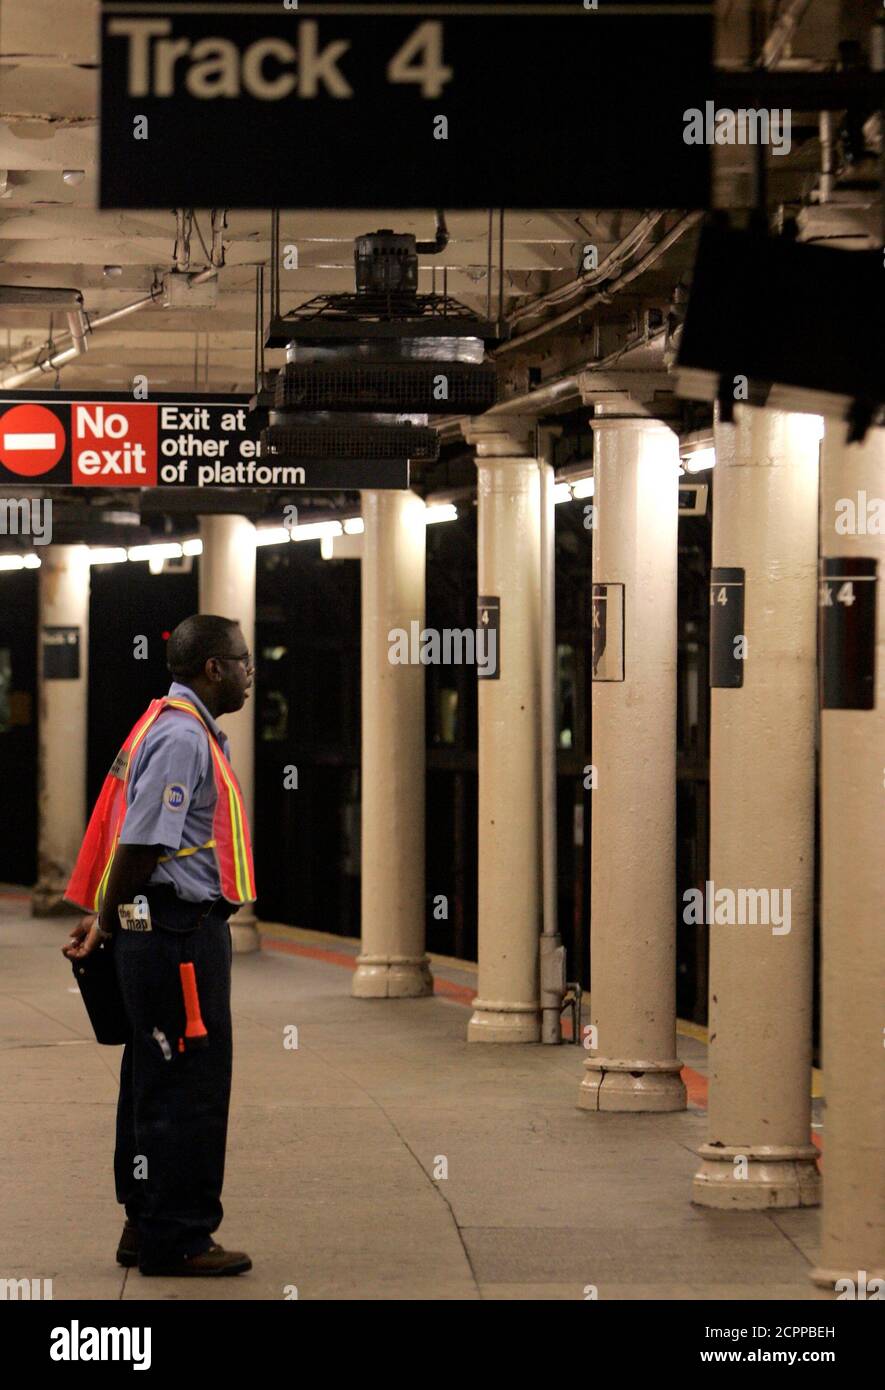 A New York MTA employee stands on a deserted platform during the evening rush, after the trains were shut down as a result of a power outage in parts of  New York, June 27, 2007. the power outage struck parts of Manhattan's wealthy Upper East Side during a heat wave on Wednesday, shutting down some subway service and schools while forcing an evacuation of a major art museum  REUTERS/Brendan McDermid (UNITED STATES) Stock Photo